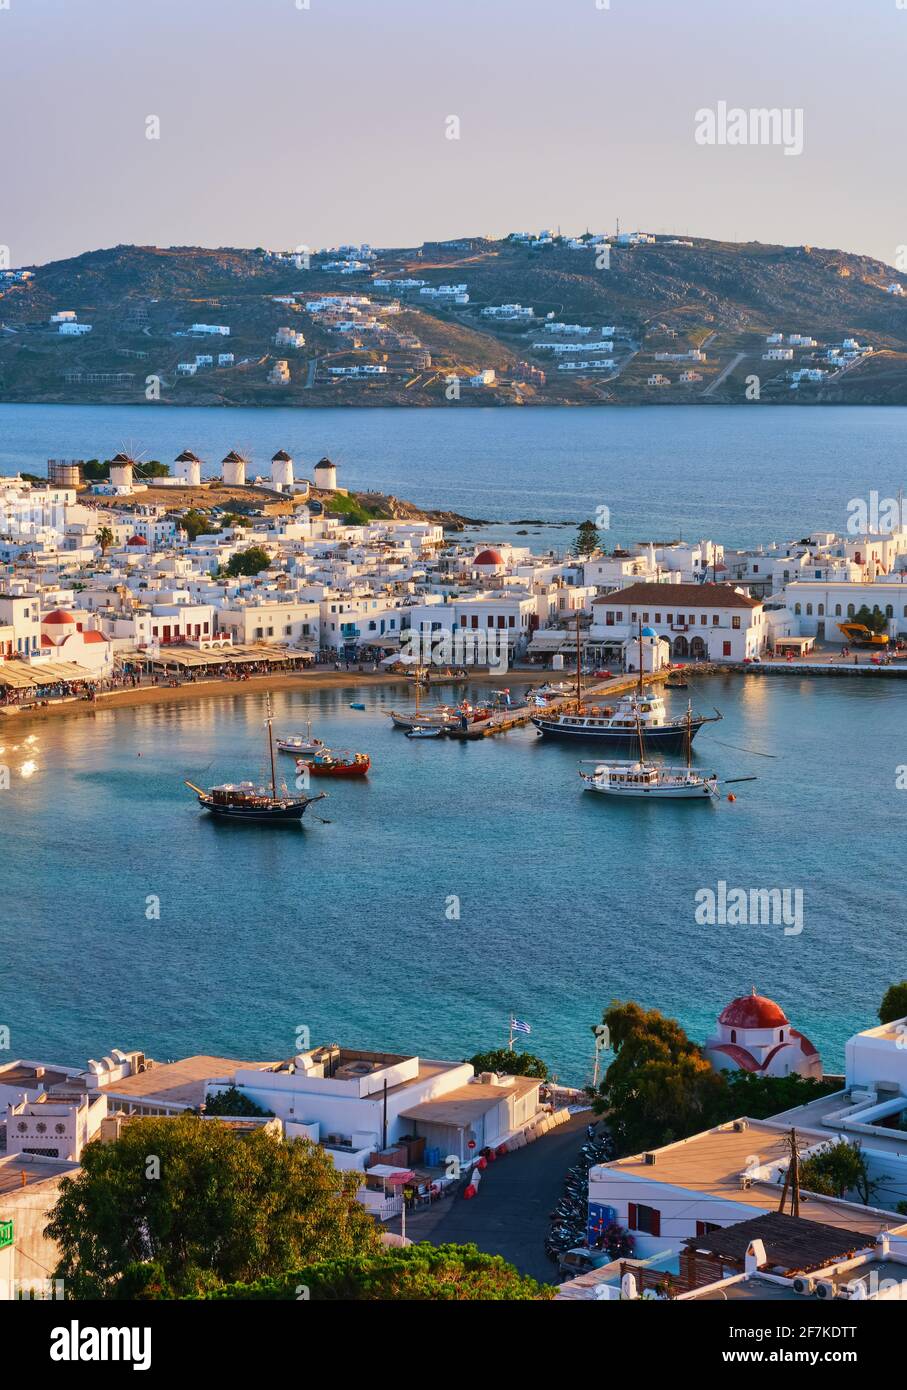 Beautiful sunset view of Mykonos, Cyclades, Greece, its port, windmills. Cruises, ship, whitewashed houses. Vacation, leisure, Mediterranean lifestyle Stock Photo